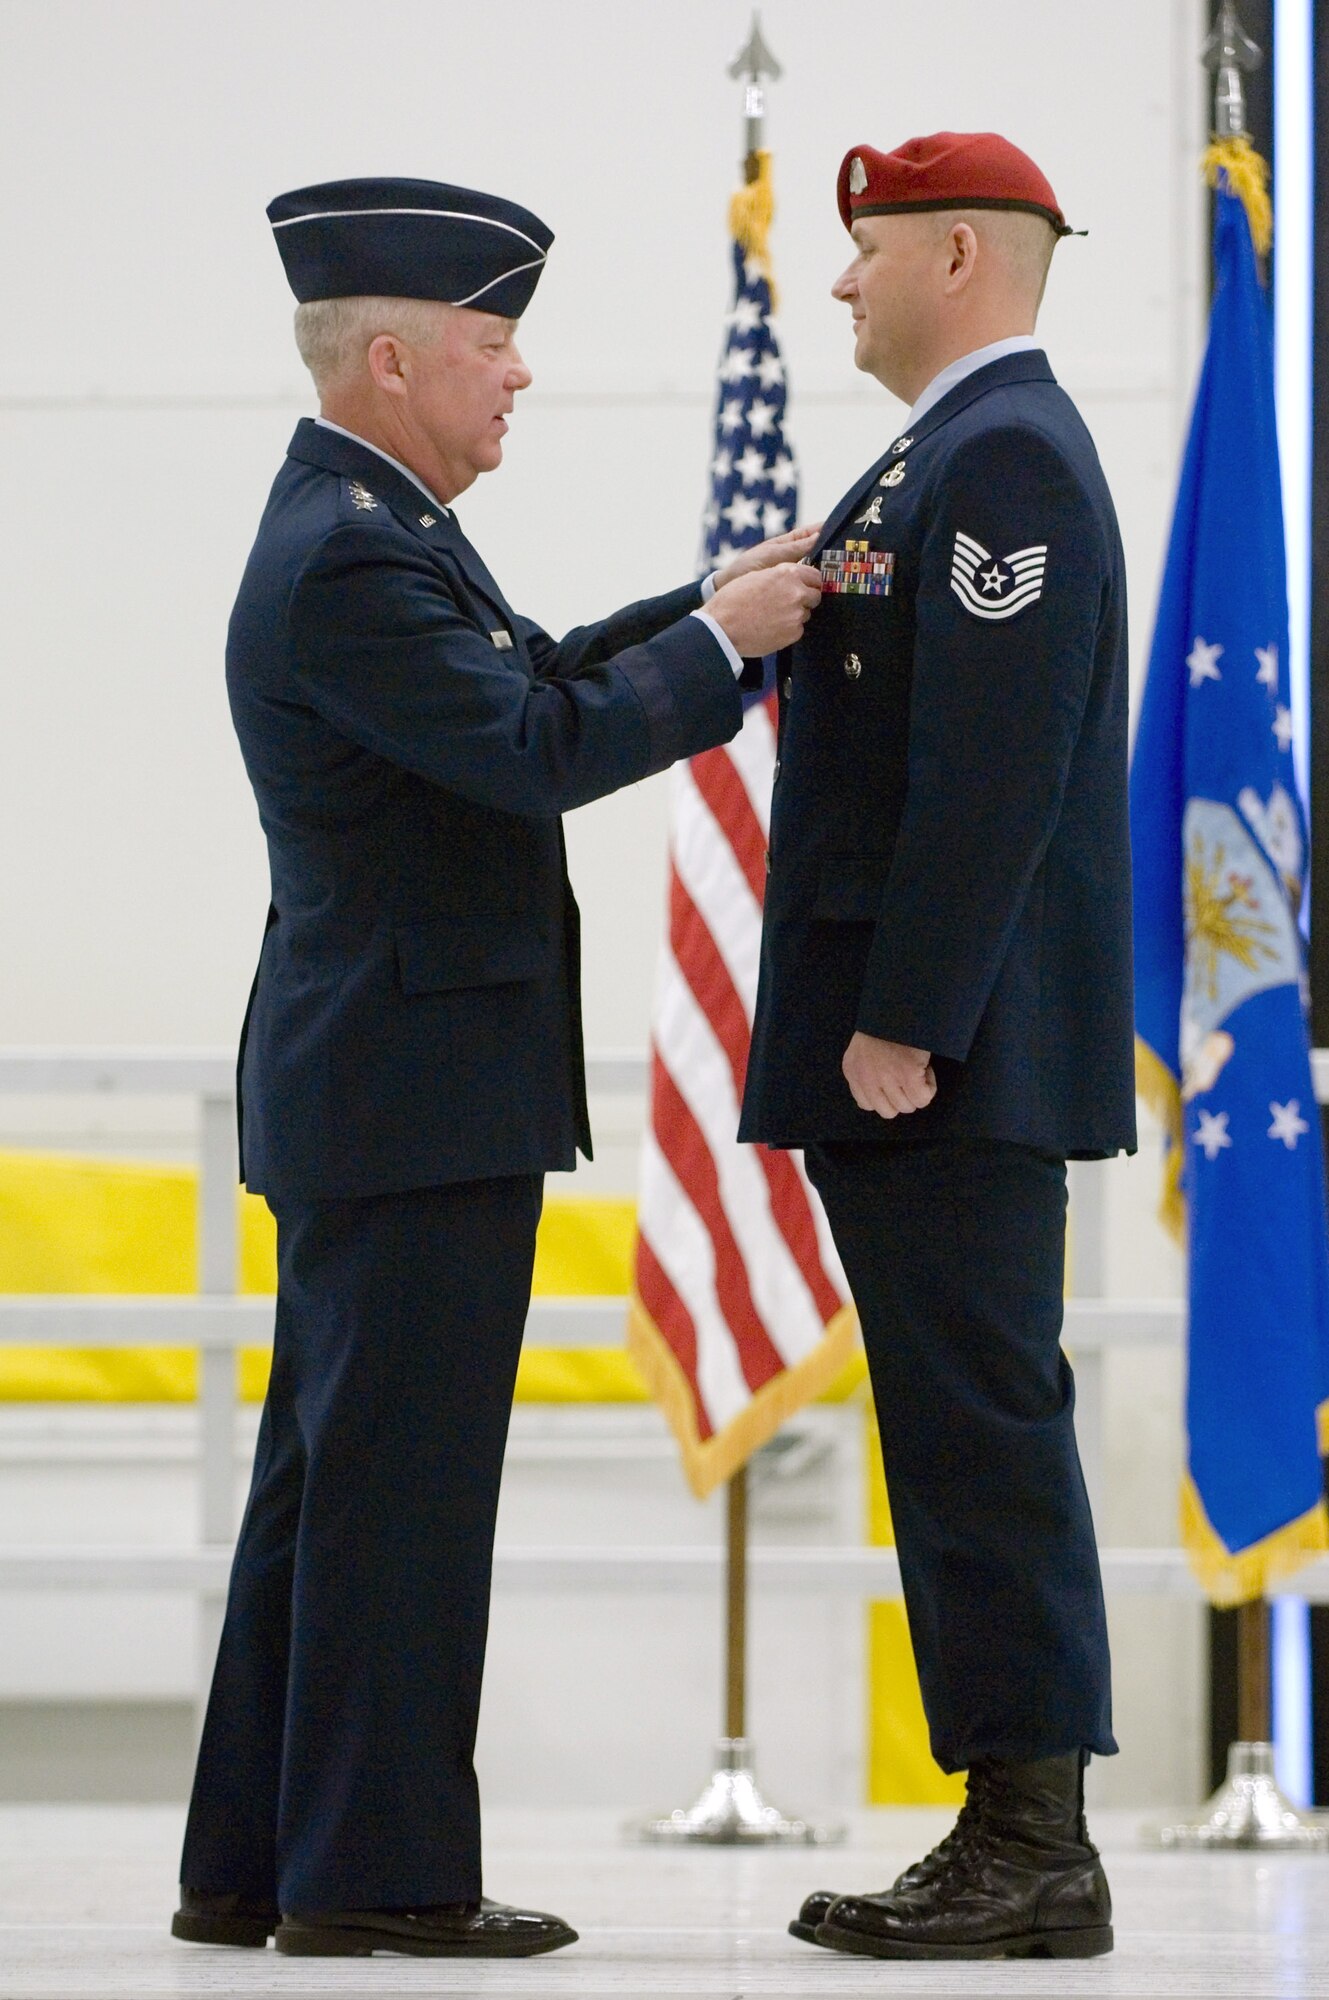 Lt. Gen. Donald C. Wurster pins the Silver Star on Tech. Sgt. Scott Innis during a Dec. 18 medal ceremony at McChord Air Force Base, Wash. General Wurster is the Air Force Special Operations Command commander. Sergeant Innis is assigned to the 22nd Special Tactics Squadron. The Silver Star, the nation's third highest decoration for valor, was presented first to Sergeant Innis for his actions during a firefight with enemy forces in Afghanistan during spring 2006. Sergeant Innis also received a Bronze Star with Valor and an Air Force Combat Action Medal for his actions during his unit's 2007 deployment to Southwest Asia. (U.S. Air Force photo/Abner Guzman) 
